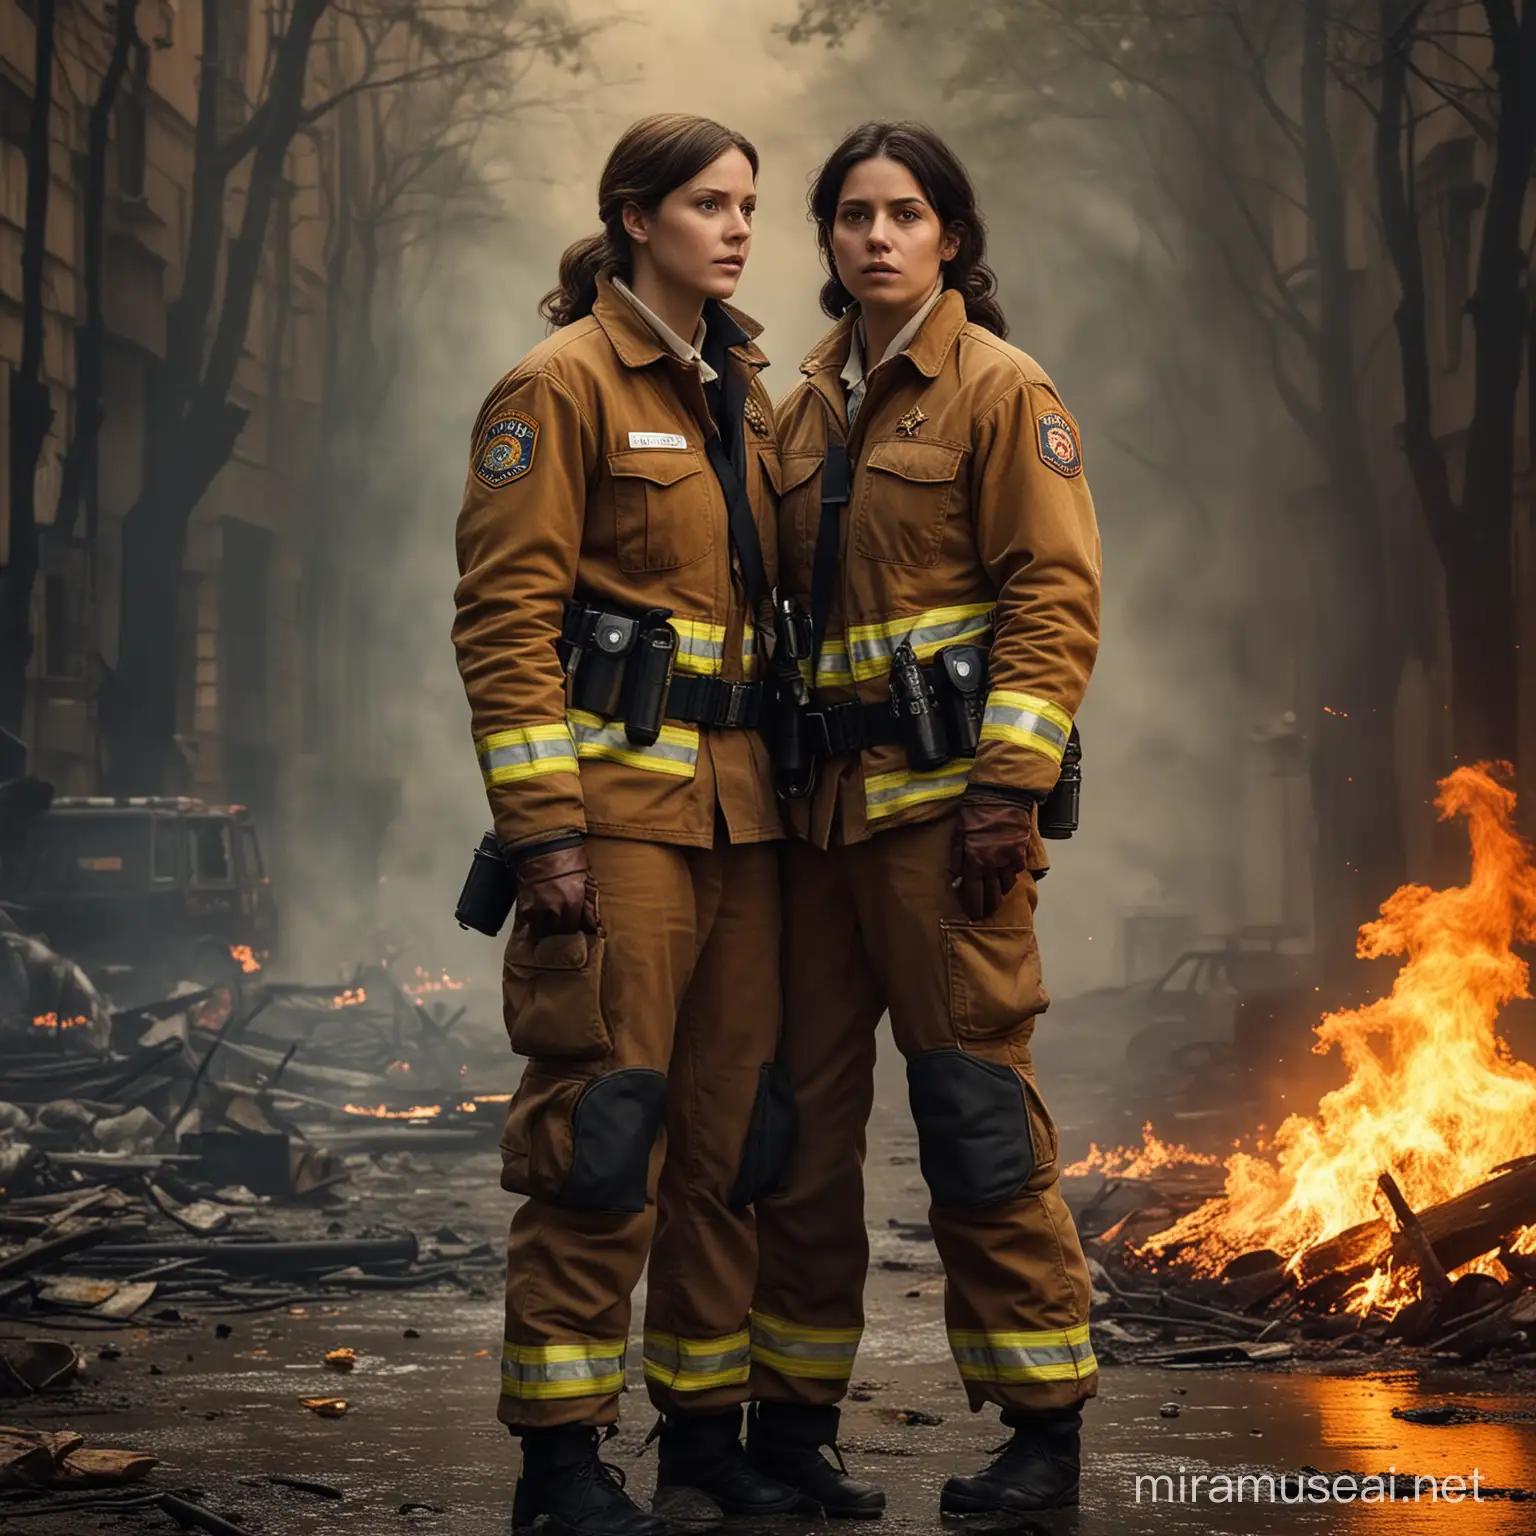 TITLE: Inferno - A Lesbian Sapphic Mystery Romance Thiller  Two FEMALE main characters: Detective Captain of the Fire Department  Synopsis of the story: Someone in the fire department is an arsonist, and the lead detective and fire captain of the fire department must work together to figure out who it is.